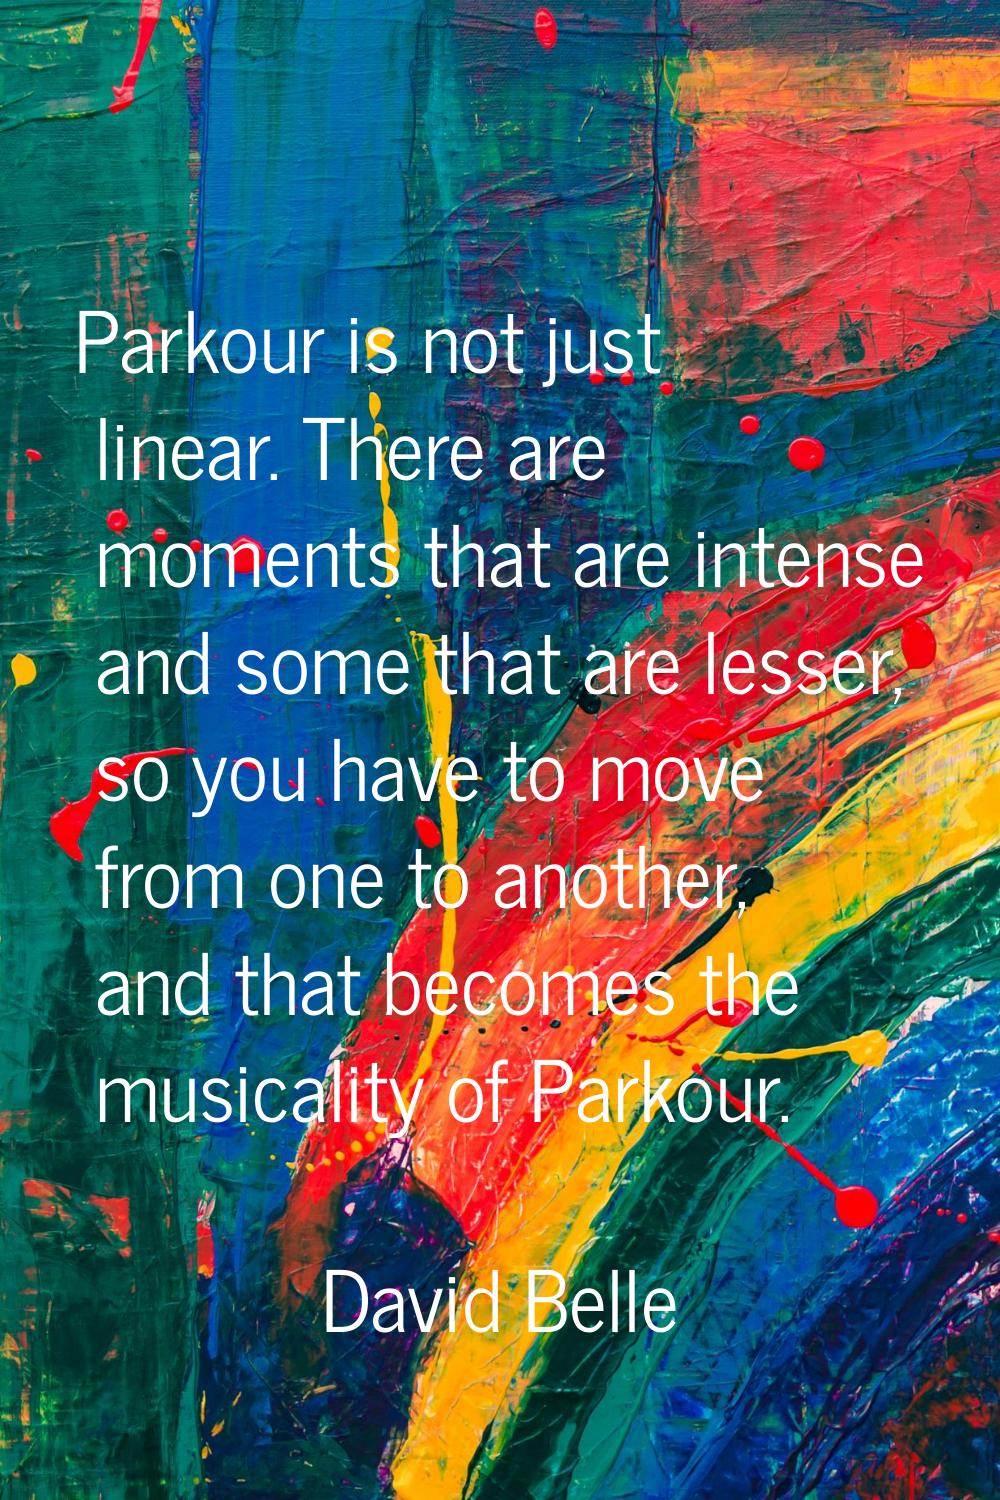 Parkour is not just linear. There are moments that are intense and some that are lesser, so you hav